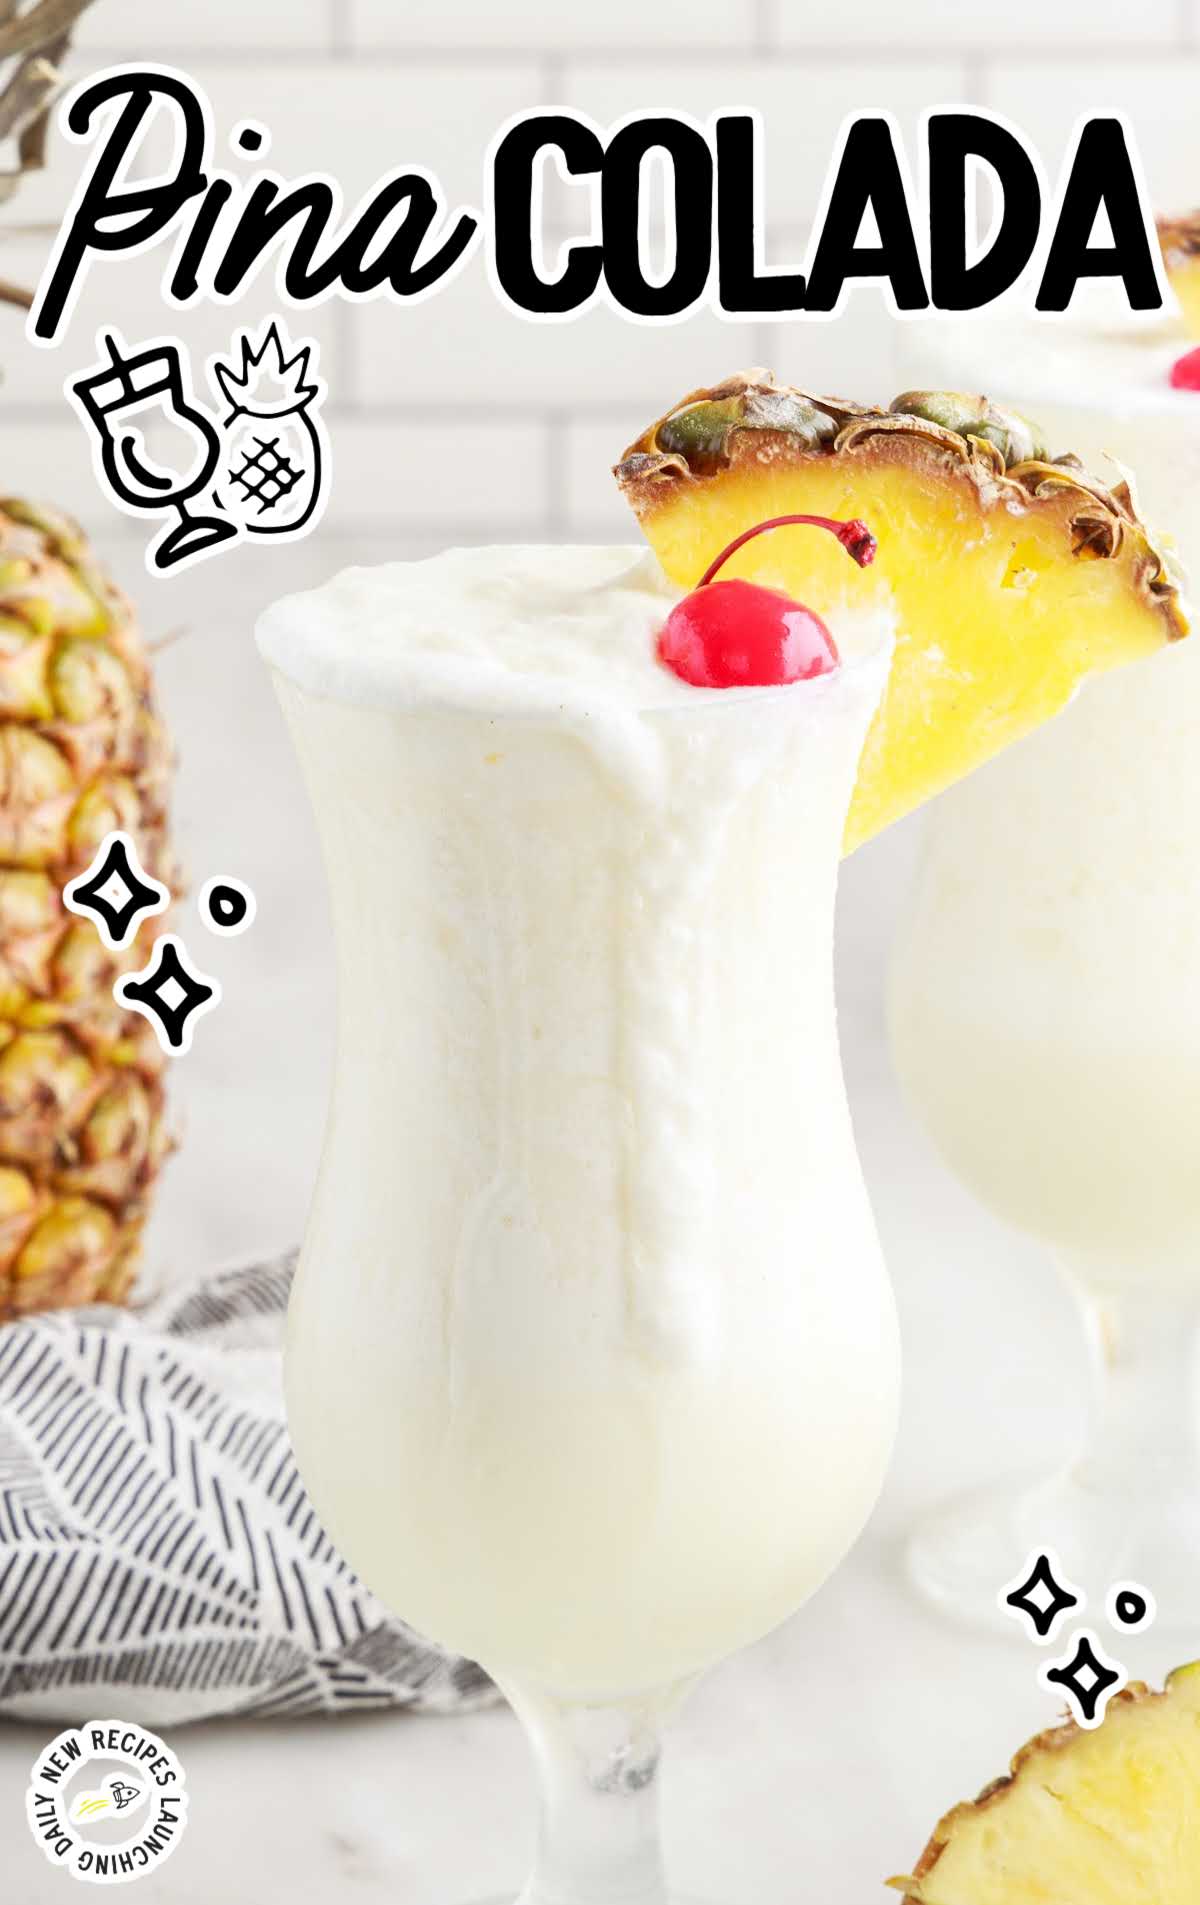 Pina Colada in a glass topped with a cherry and a slice of pineapple